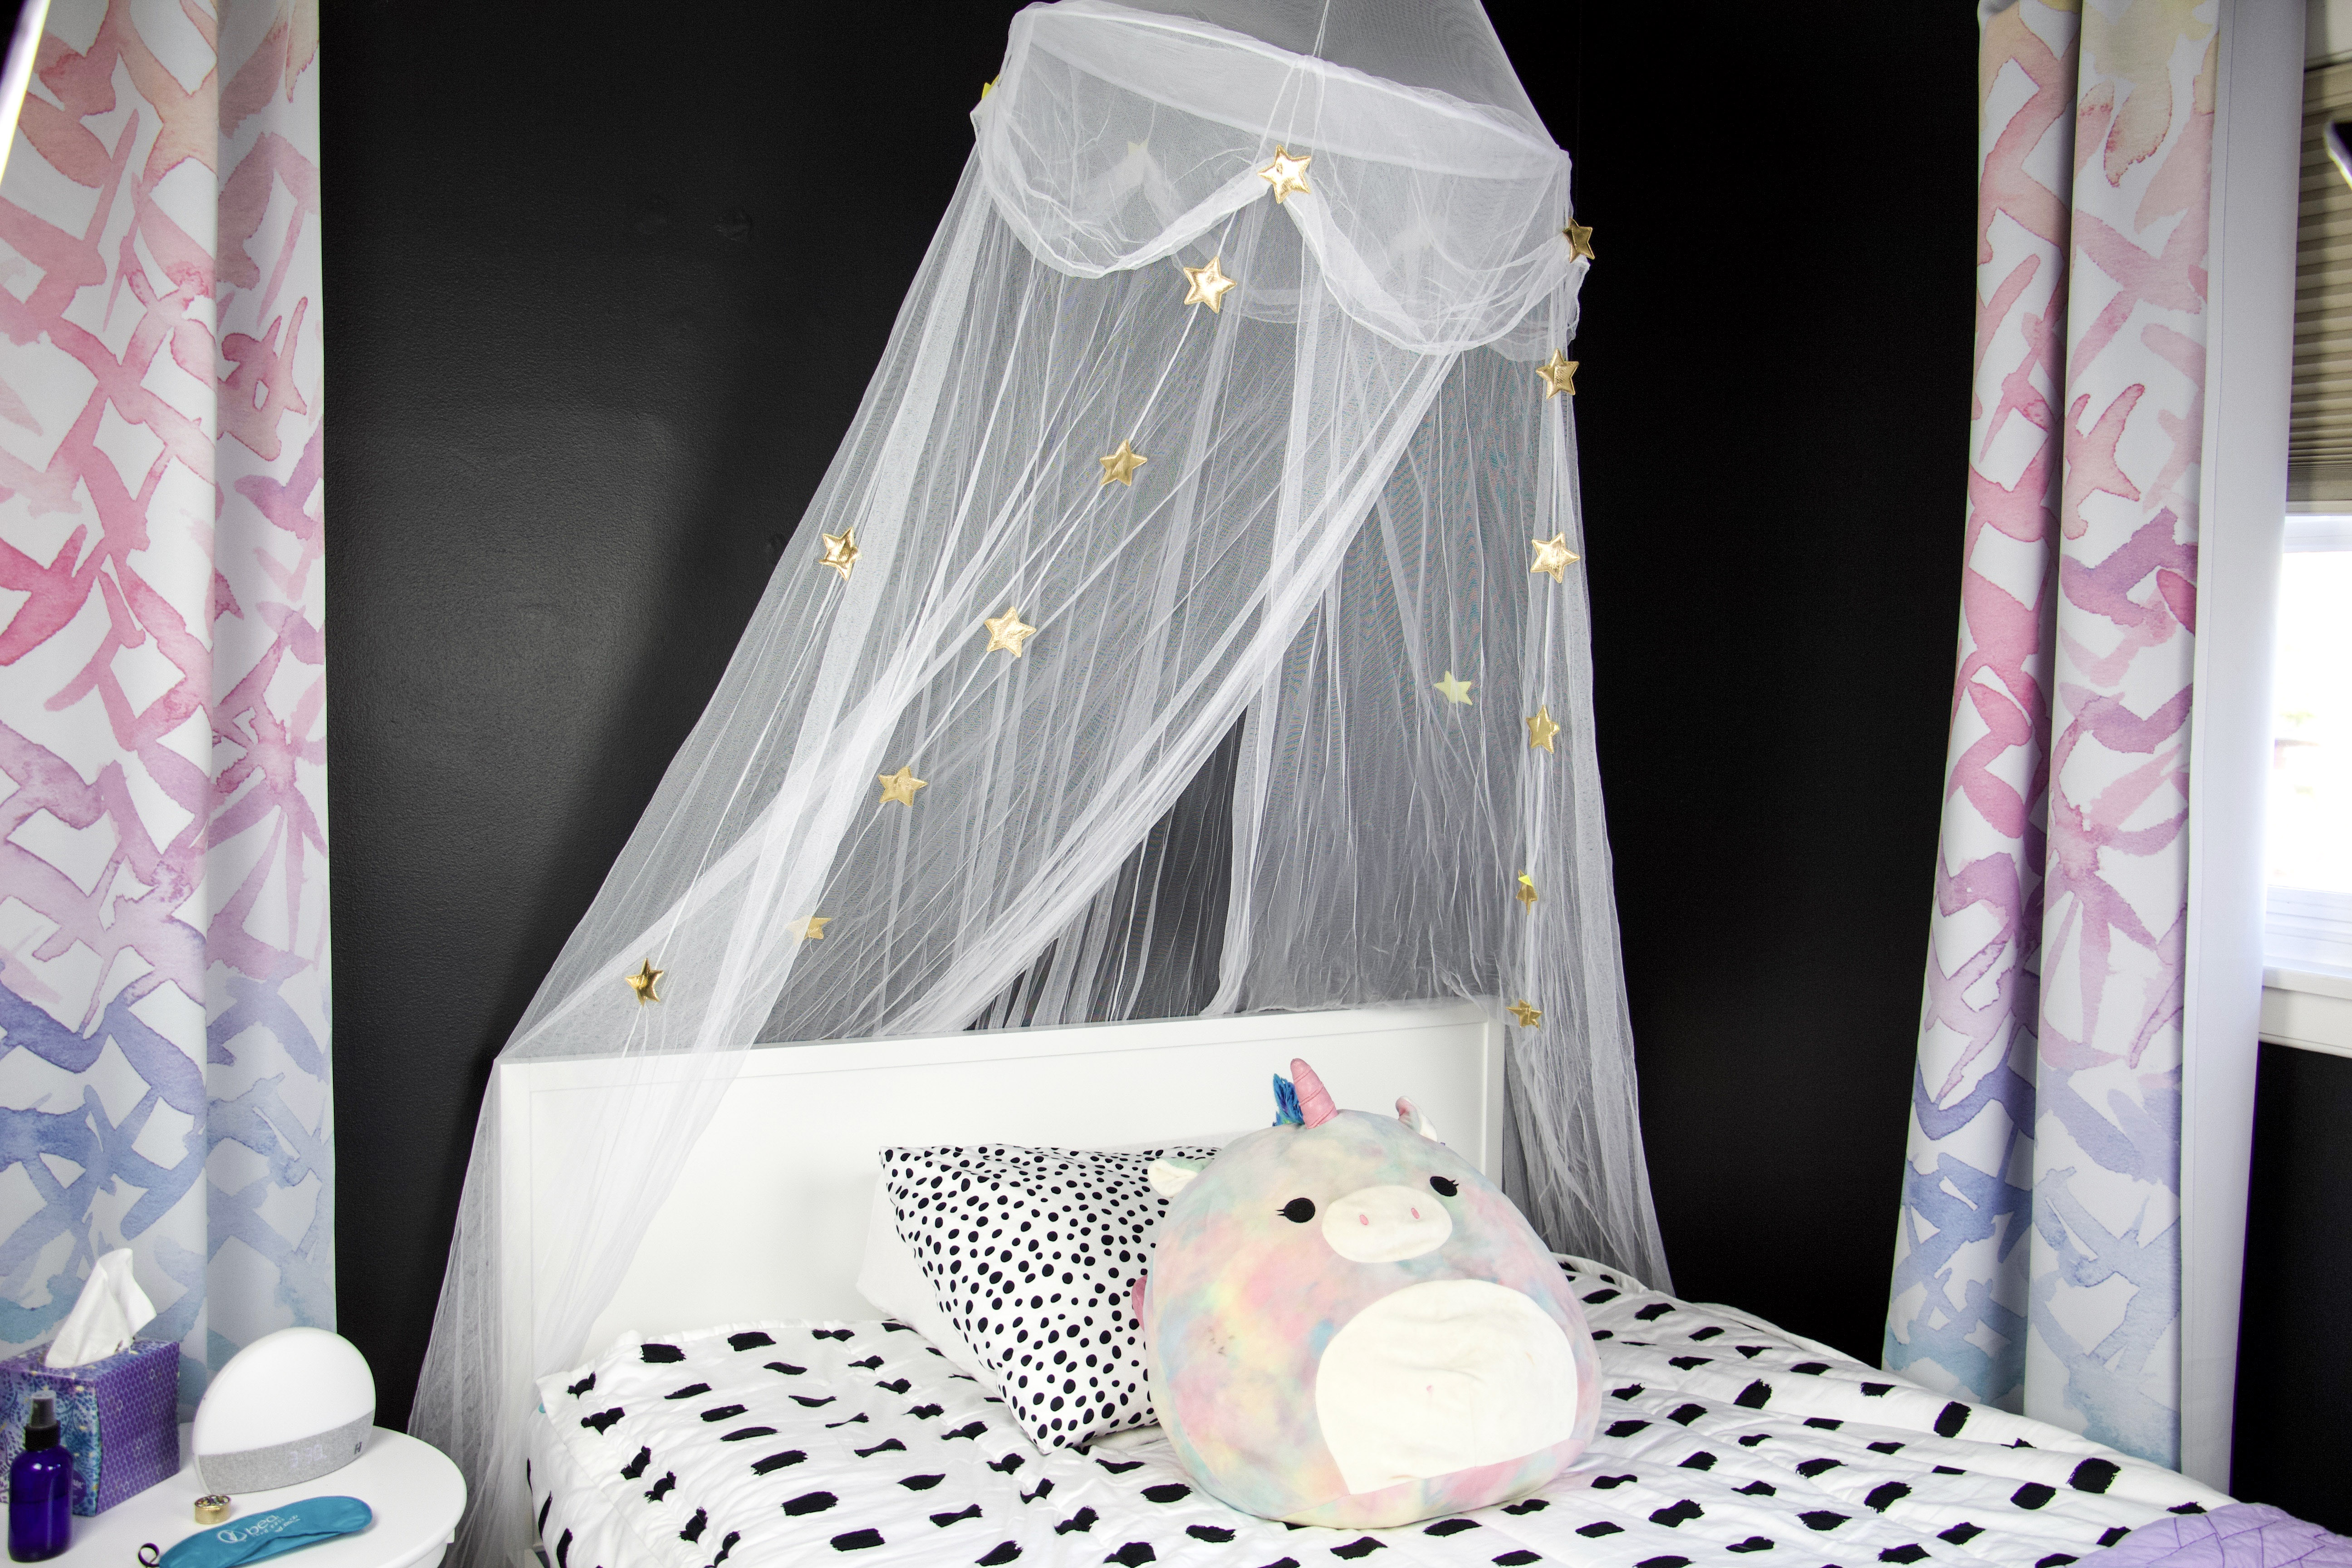 beddy's bedding, canopy over crate and kids bed against black wall